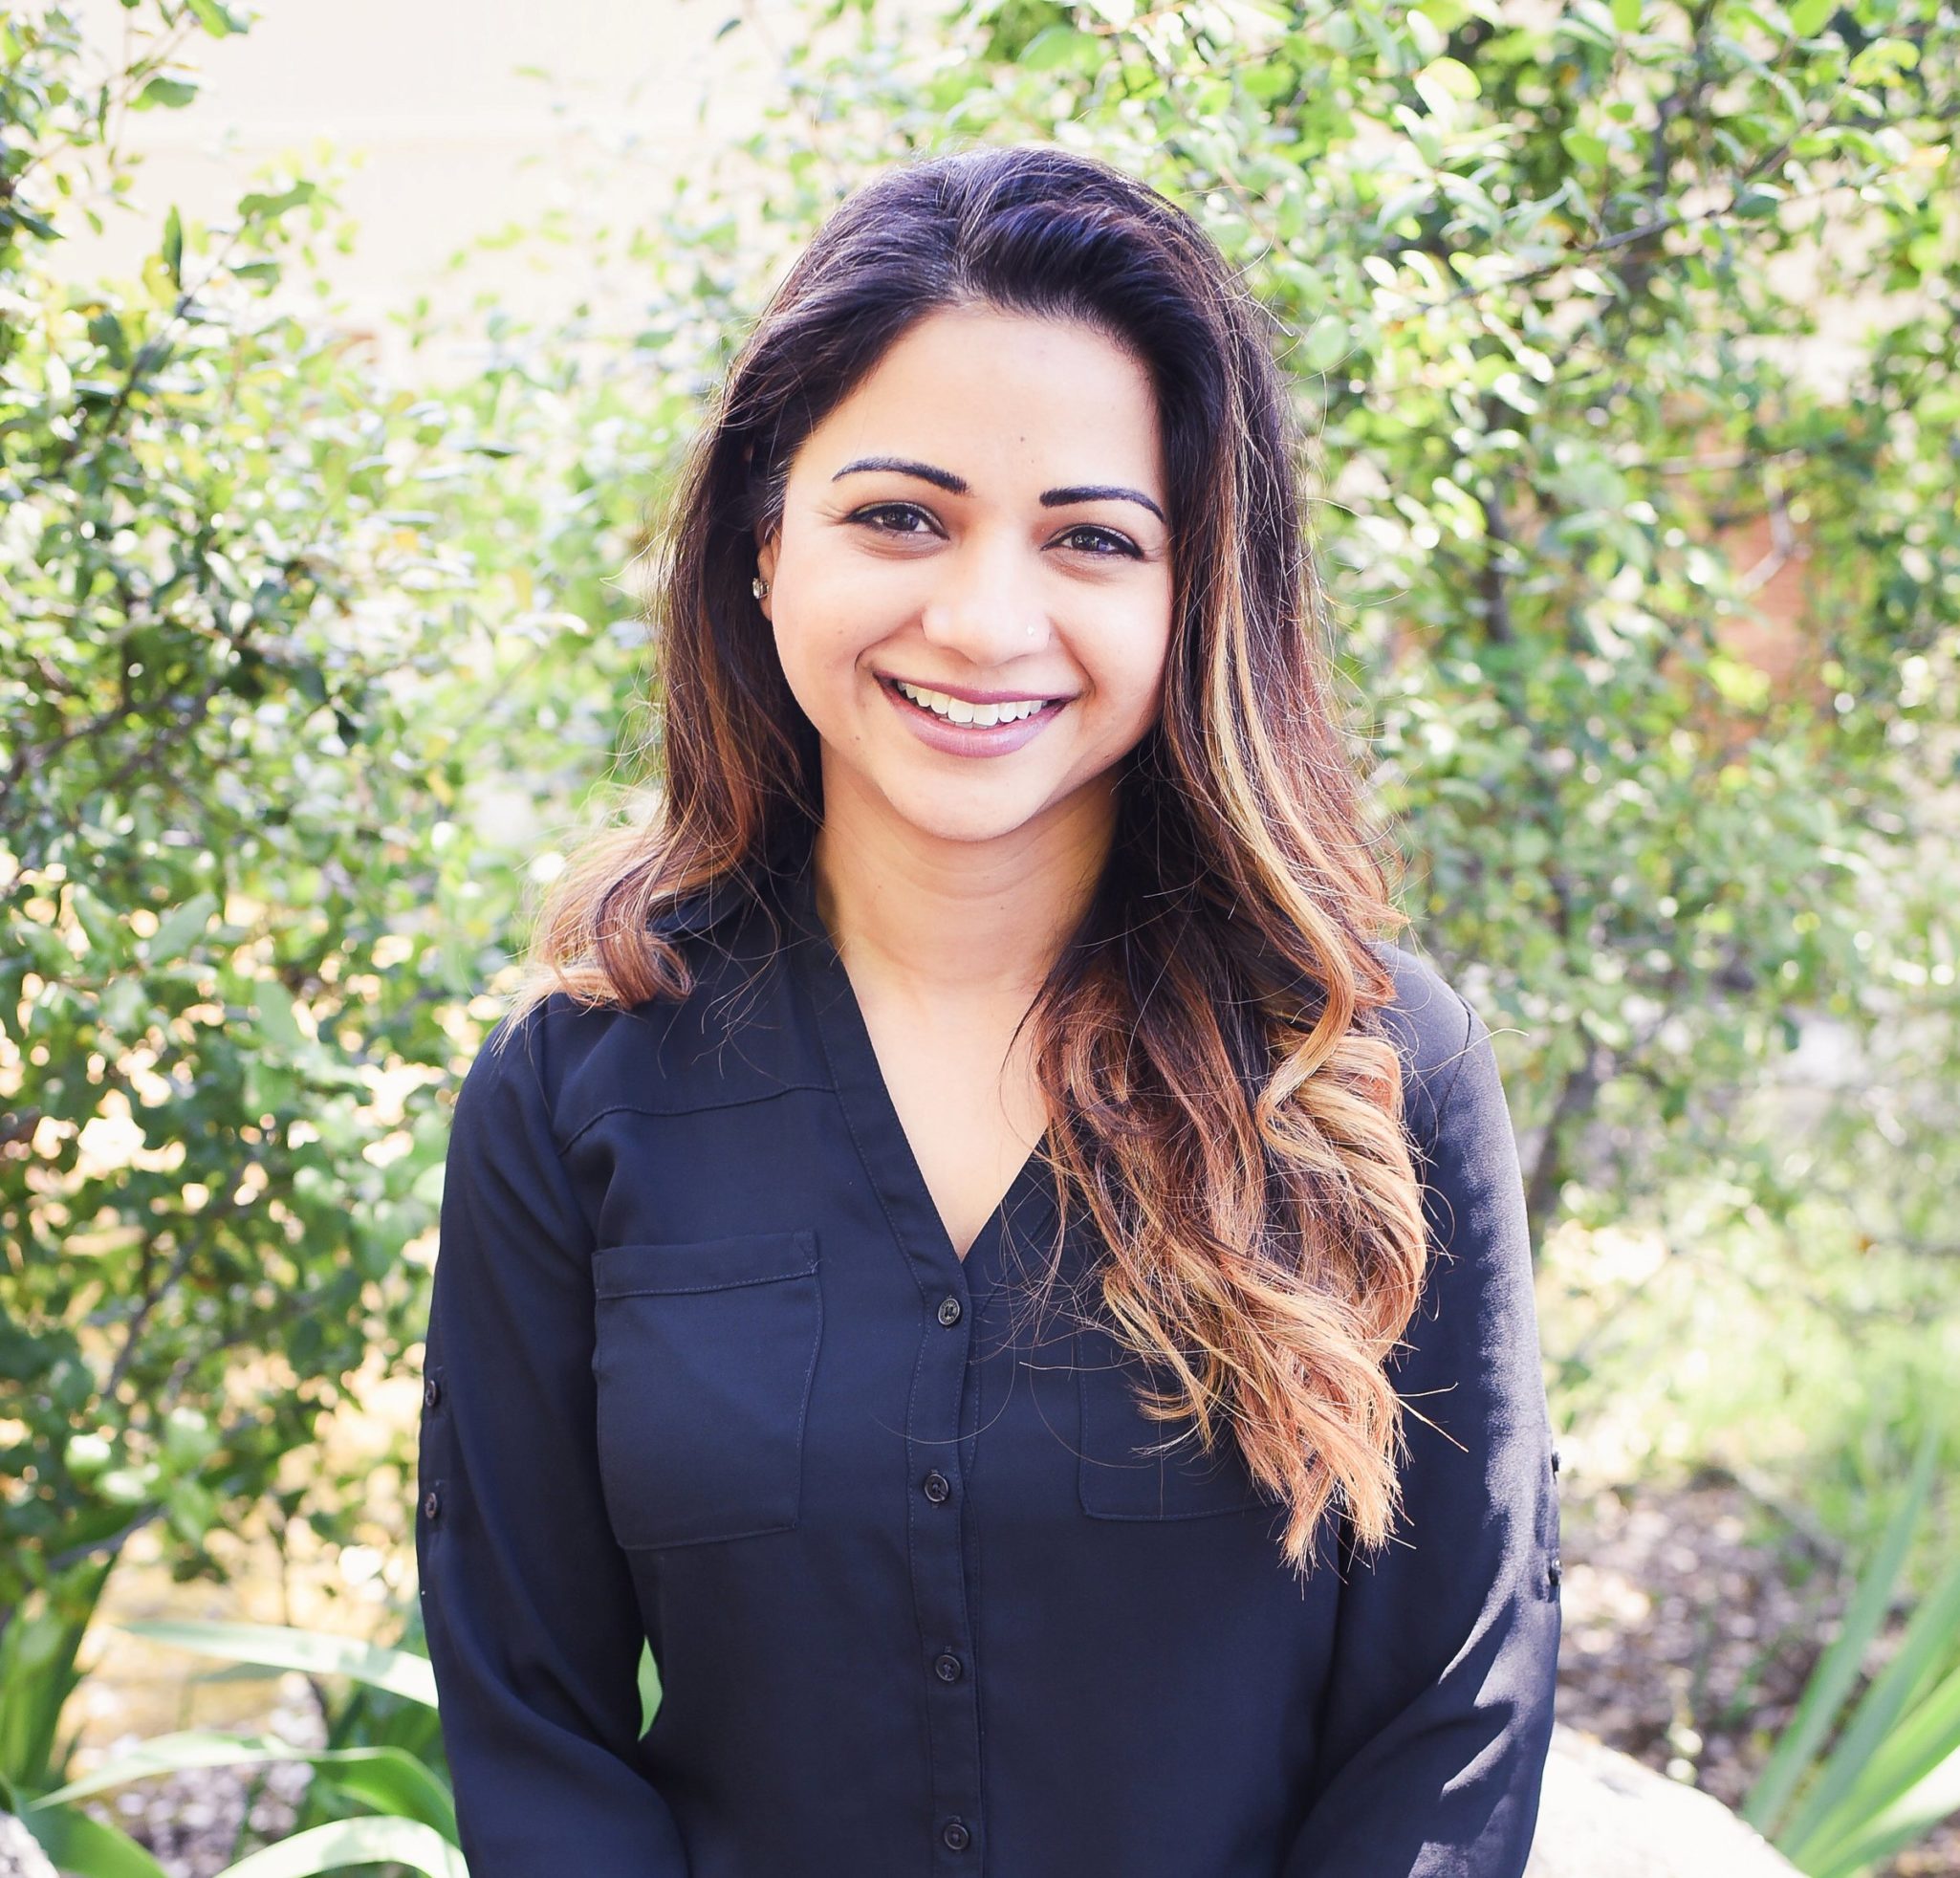 Dr. Mahal has practiced cosmetic and restorative dentistry since 2004. During her several visits to North Valley / Sacramento area, she fell in love with Granite Bay and decided to call this home in 2015 after practicing dentistry in Florida for the 10+ years. During this time, she earned the reputation as a dentist who can provide beautiful and lasting results for her patients whether they have a simple problem, or very complex concerns involving all of the teeth and the function of their bite.